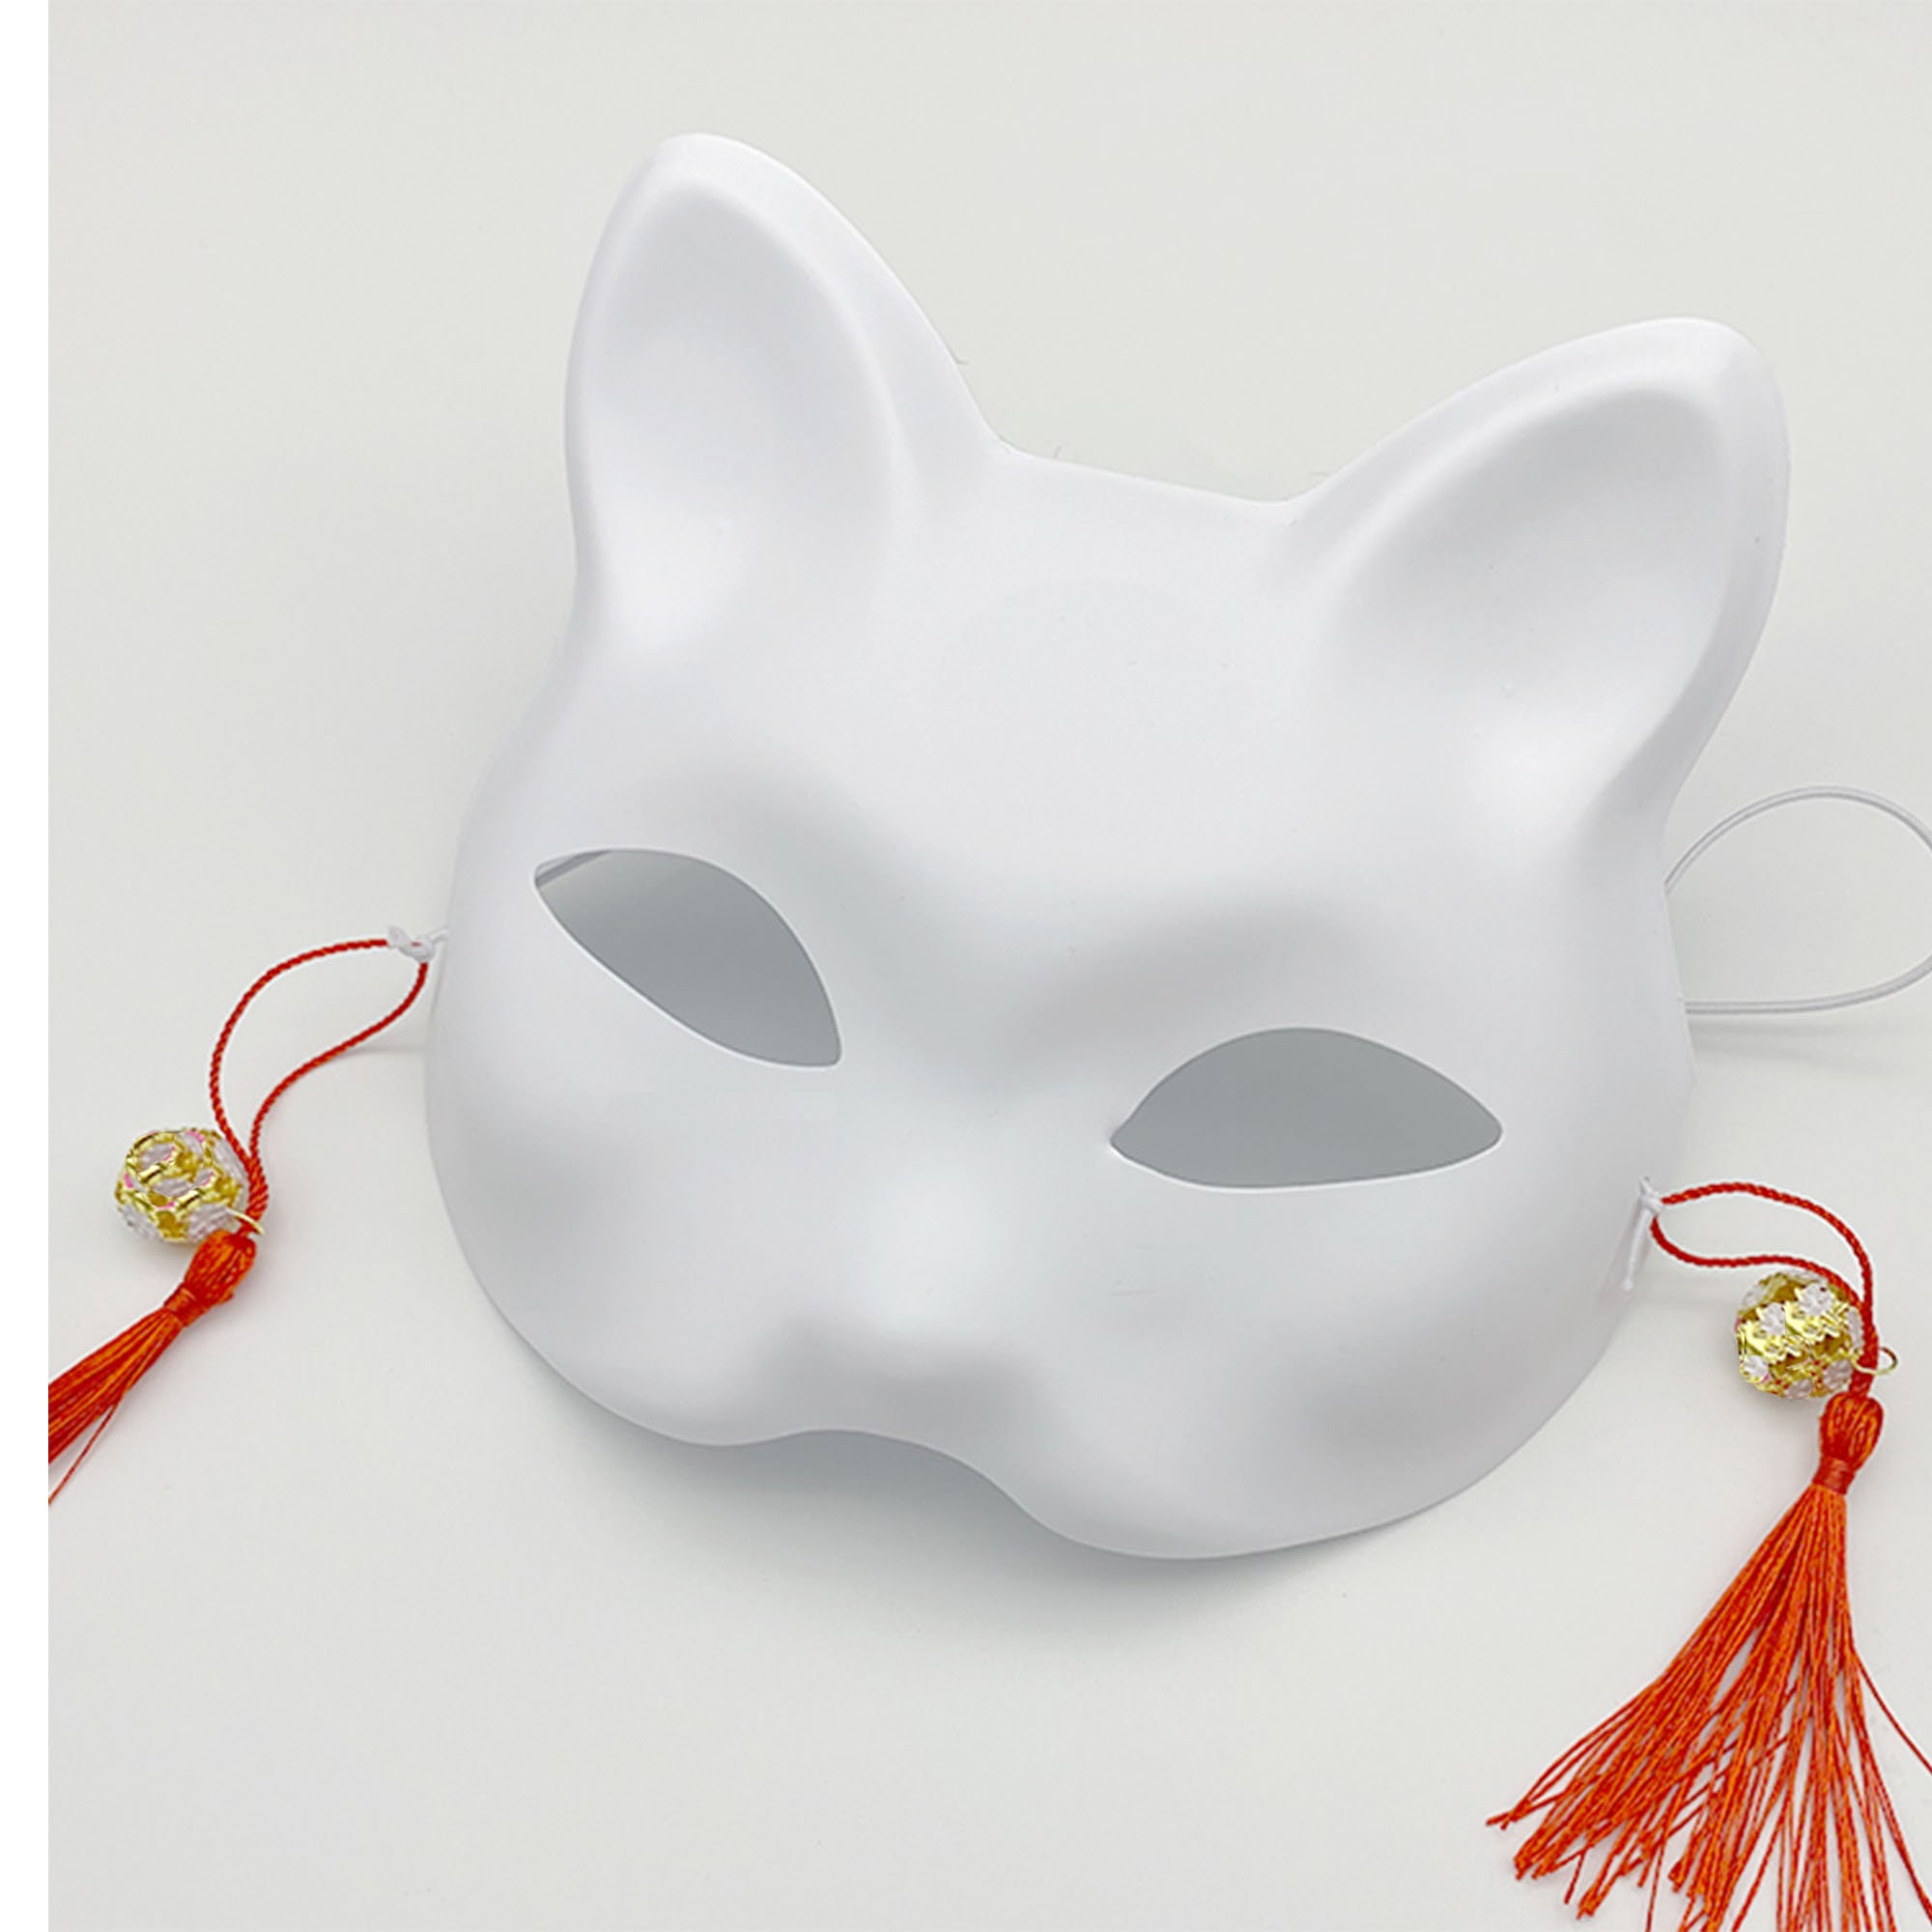  KUYYFDS Therian Mask Halloween Fox Mask Leather DIY Blank Mask  Halloween Masks Halloween Party Decorations Masquerade Costume Prop :  Clothing, Shoes & Jewelry